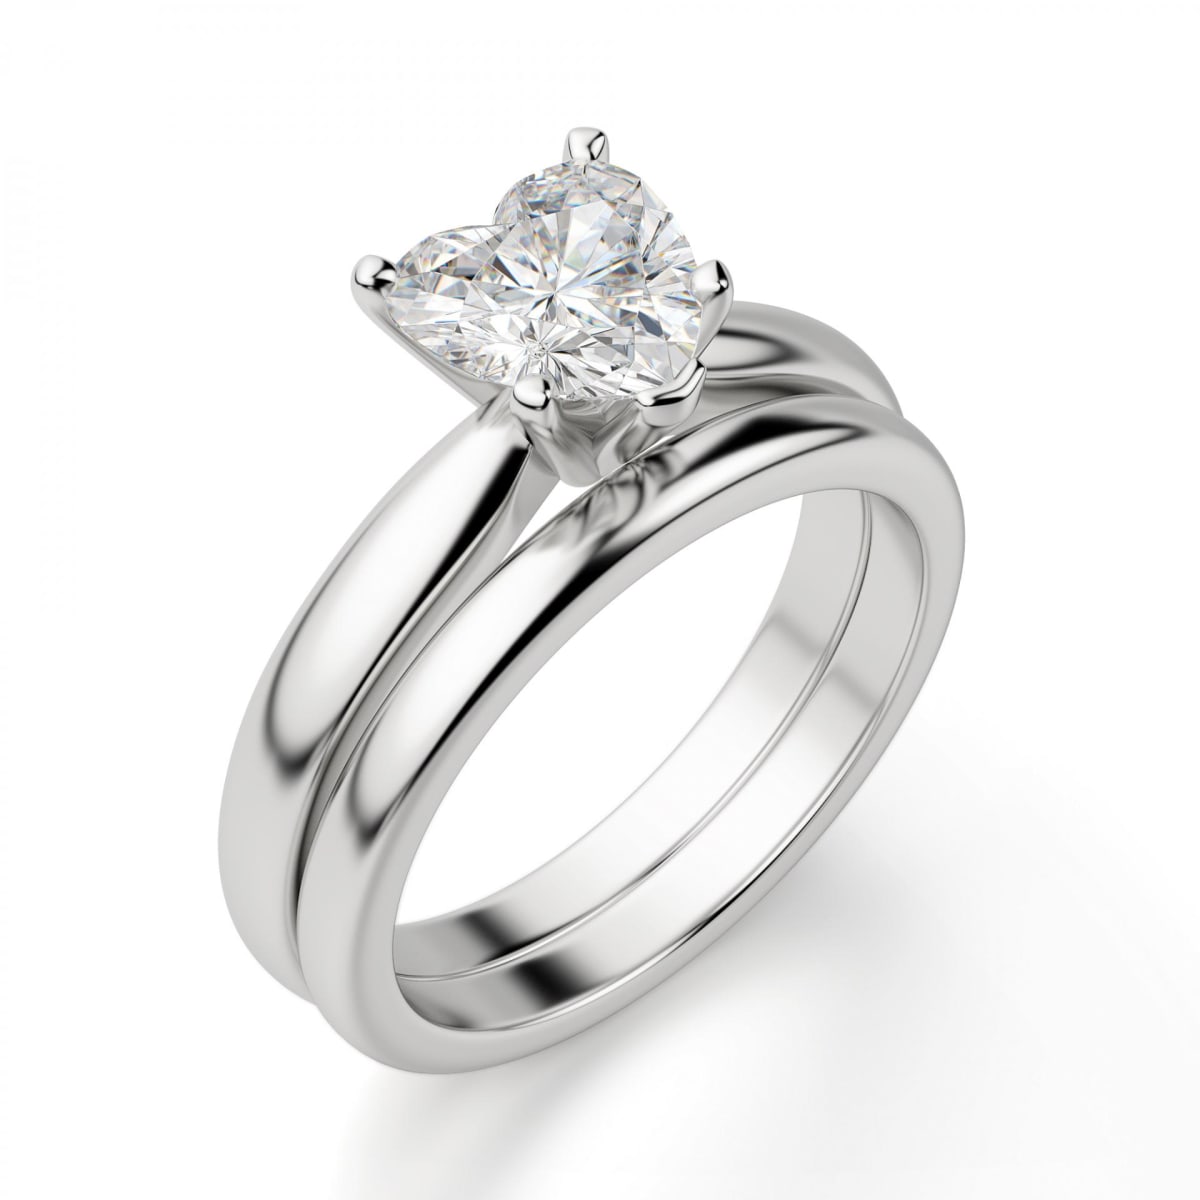 The Trillion Solitaire Moissanite Engagement Ring | Gema&Co